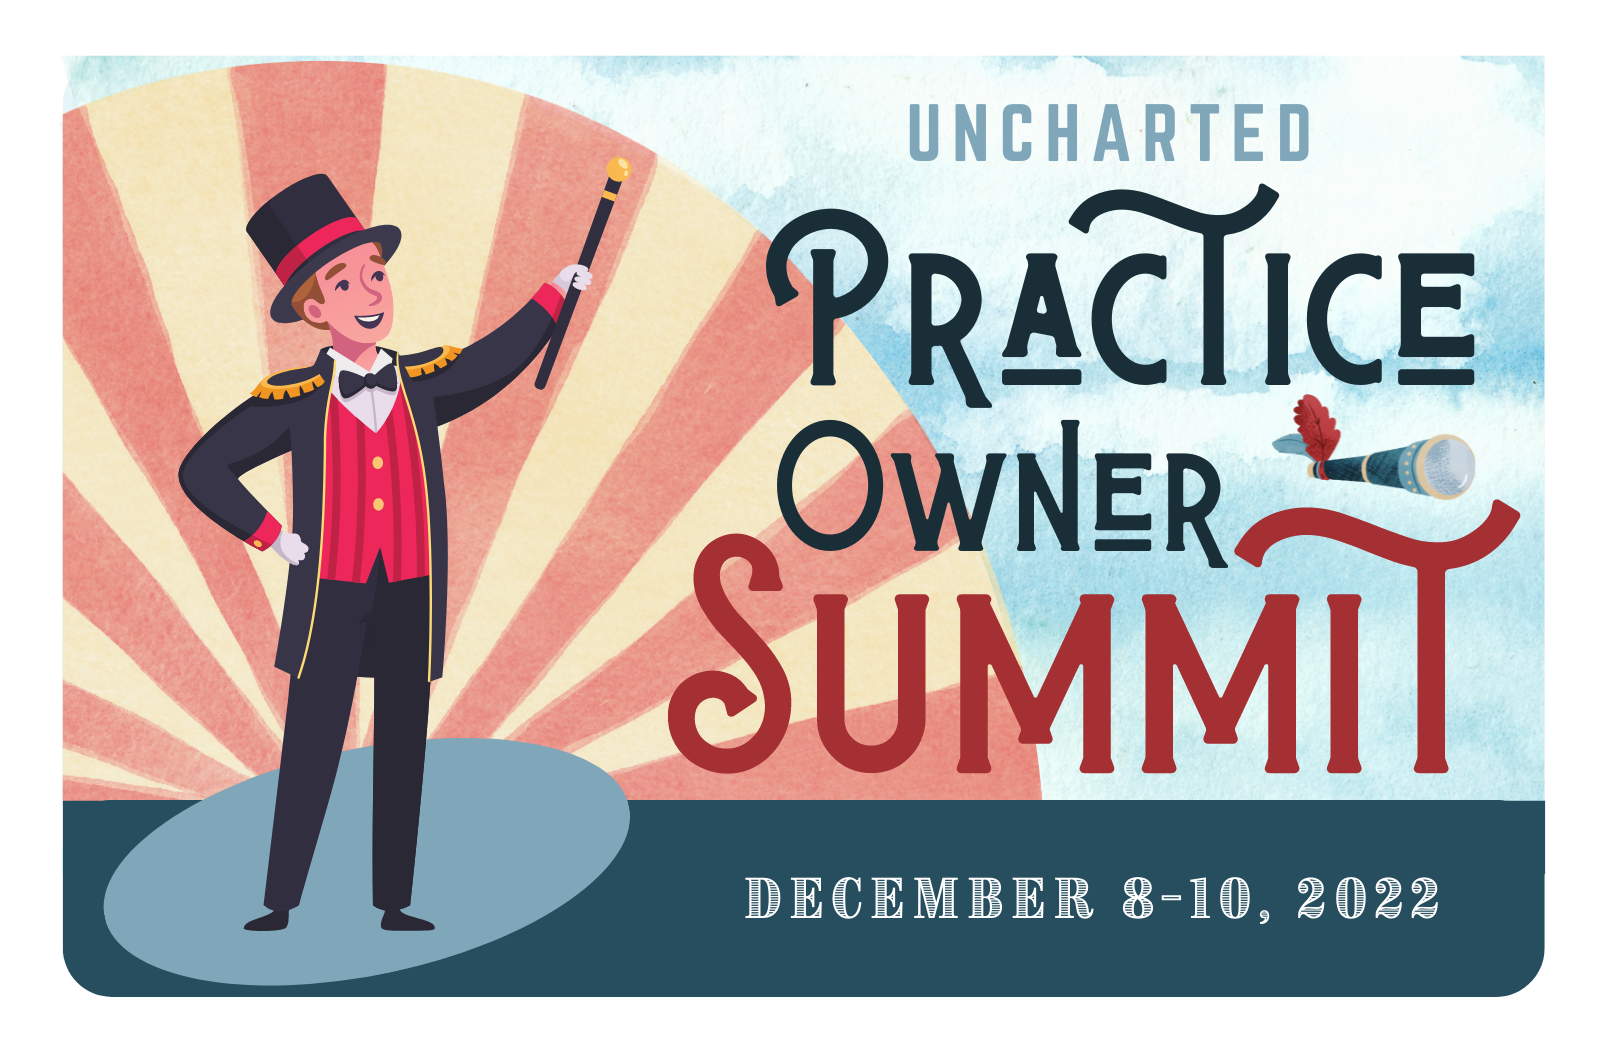 image of a ringmaster and text practice owner summit